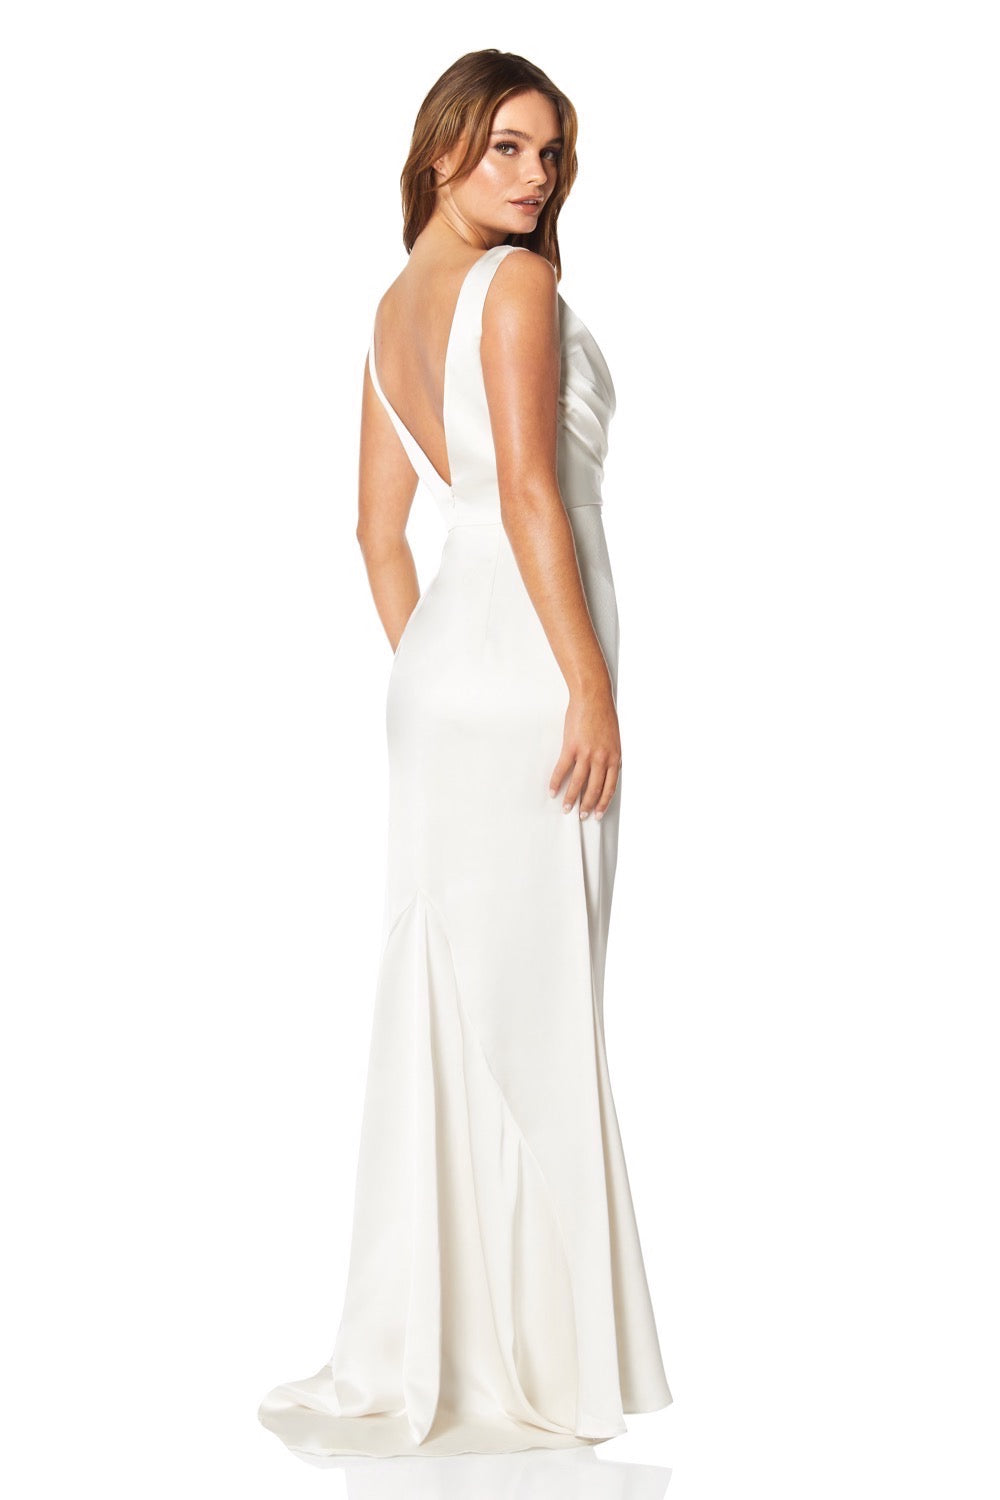 Jarlo Madia cowl front ivory satin maxi dress with thigh split and train